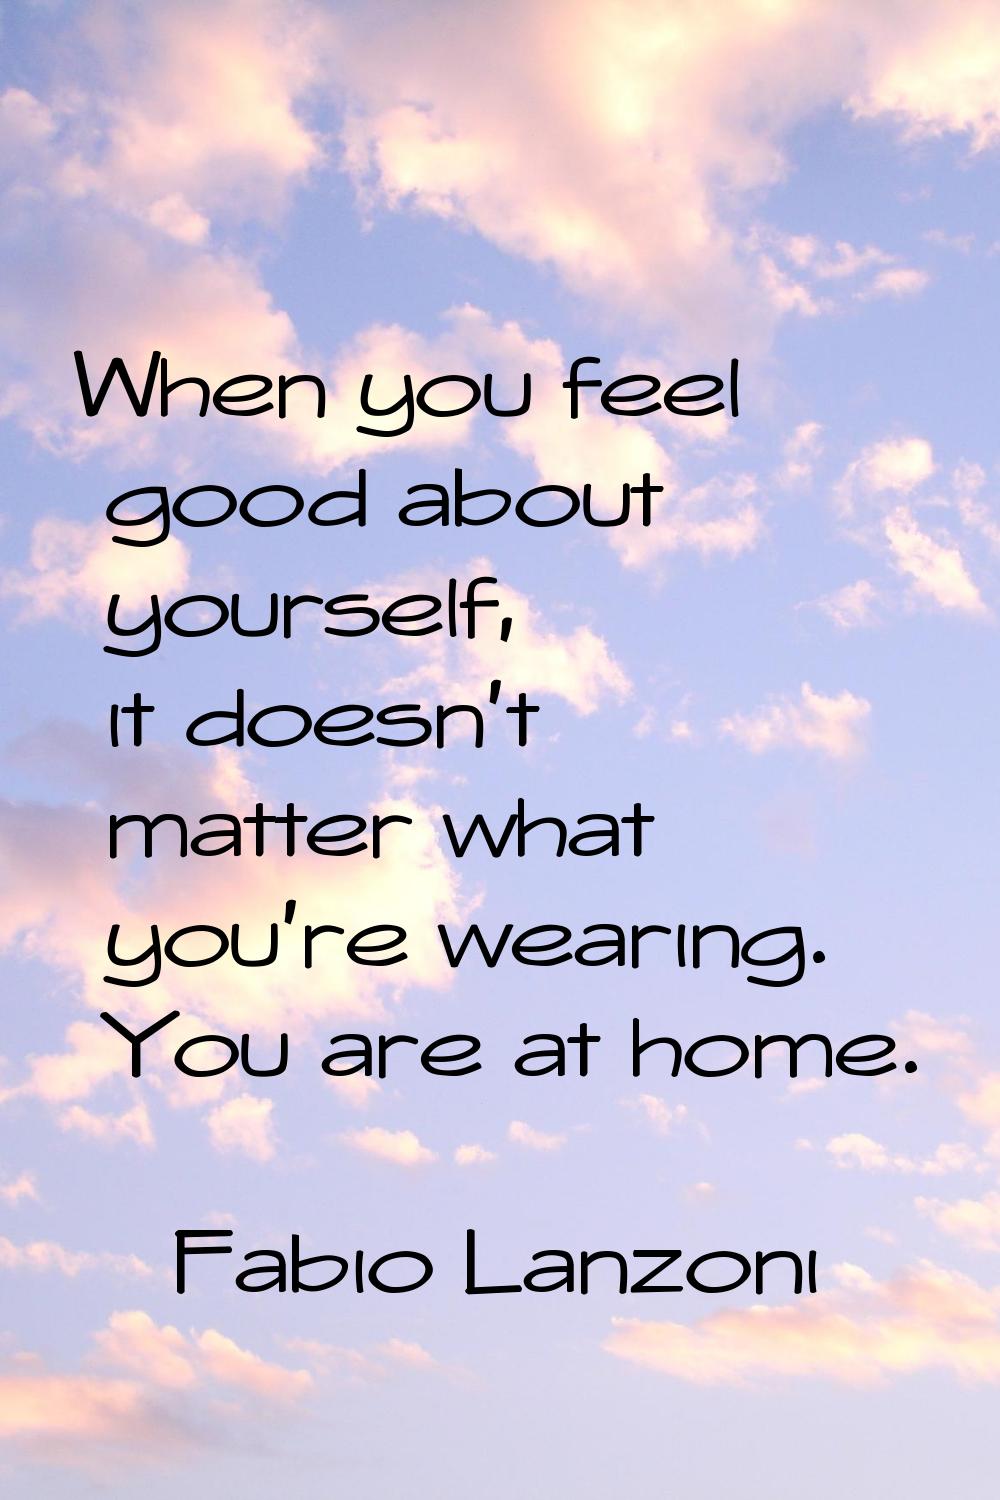 When you feel good about yourself, it doesn't matter what you're wearing. You are at home.